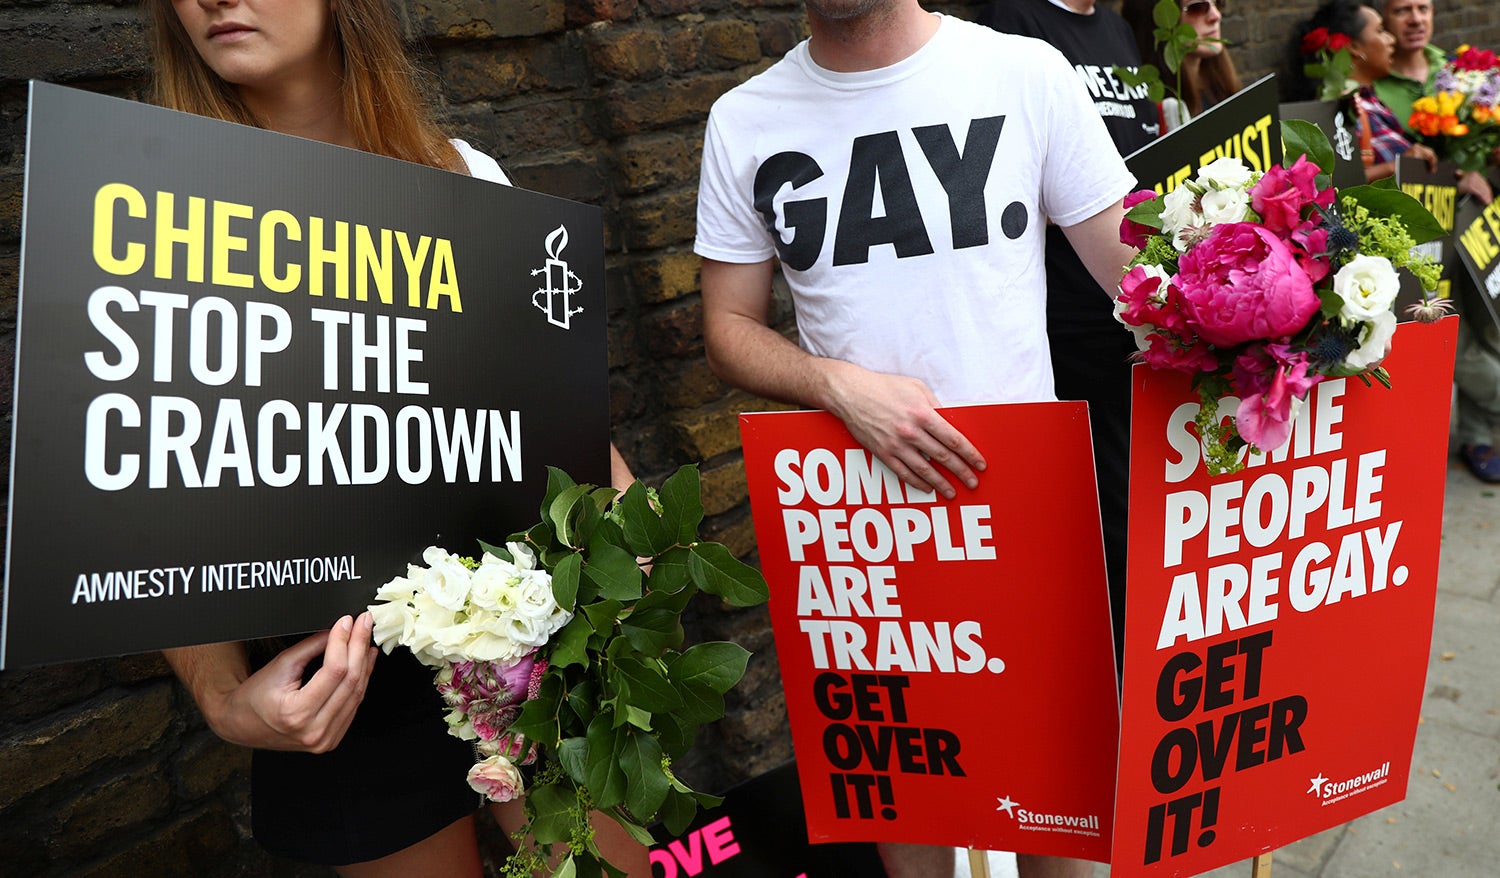 Campaigners protest for LGBT rights in Chechnya outside the Russian embassy in London, Britain on June 2, 2017.